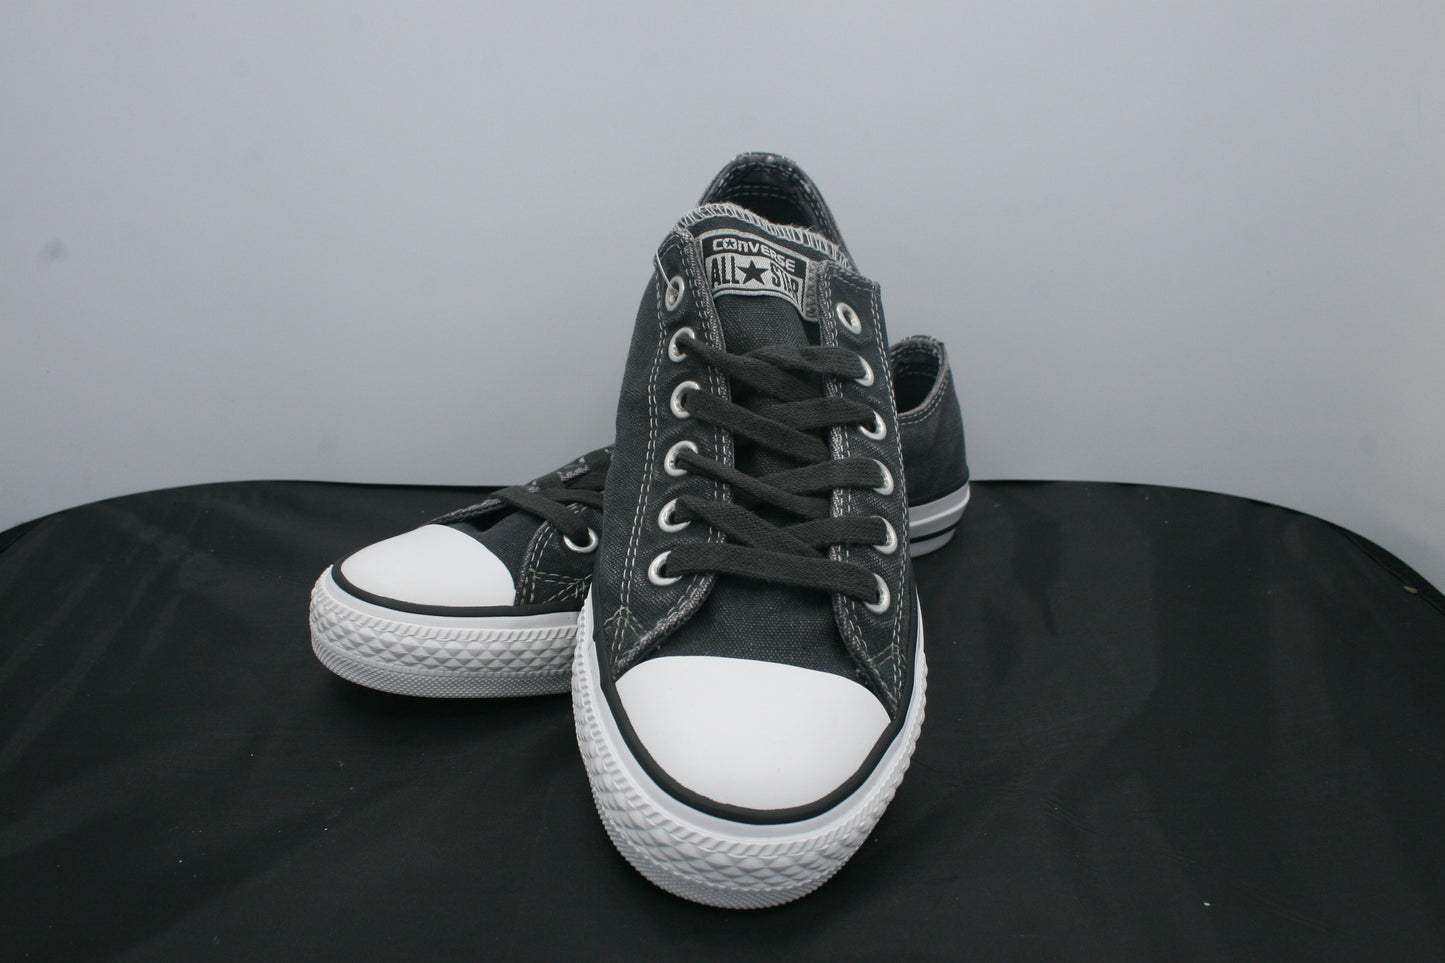 Charcoal Gray Converse All Star Sneaker